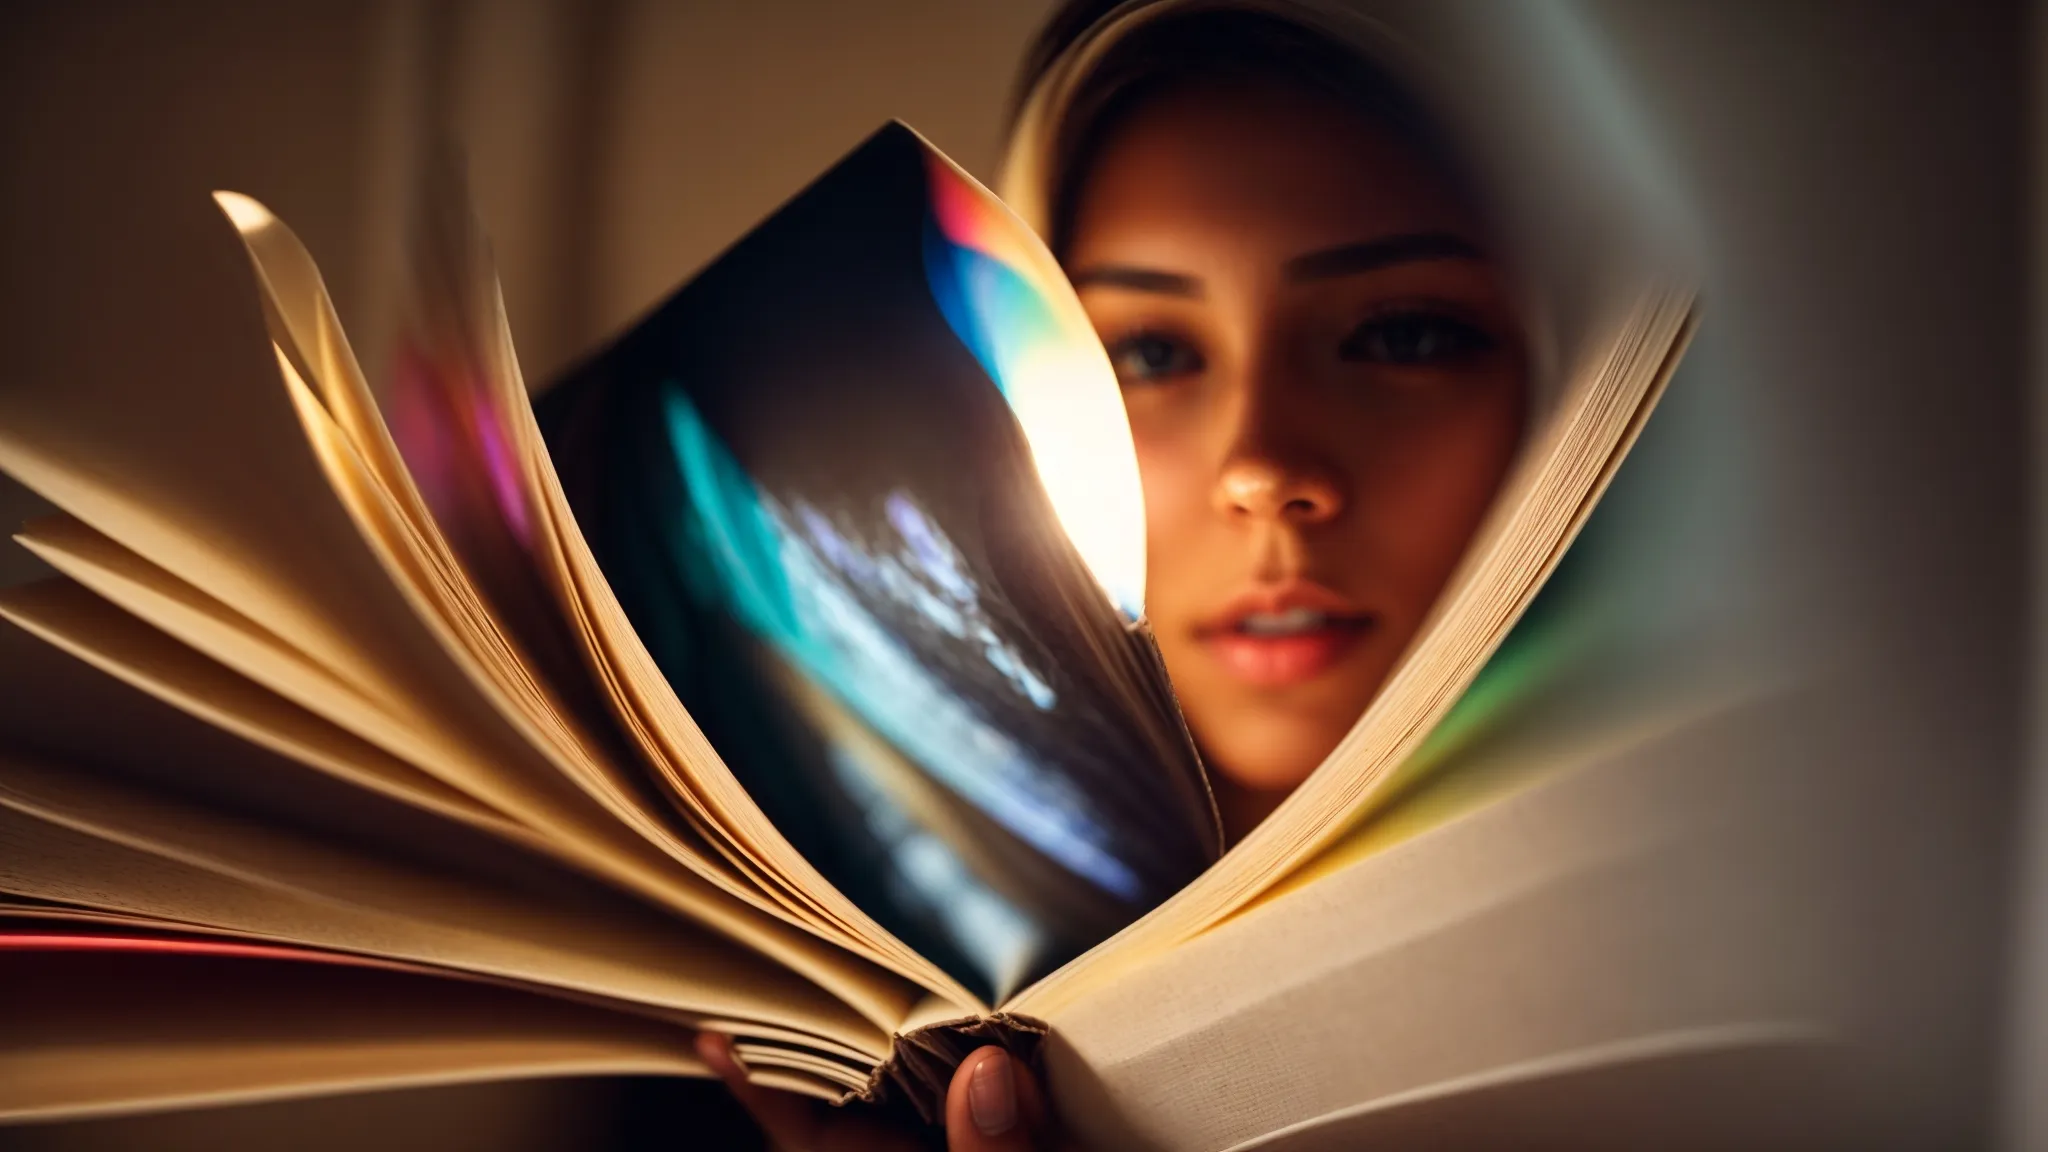 an open book radiates bright, colorful light onto a person’s face, symbolizing a wealth of knowledge.